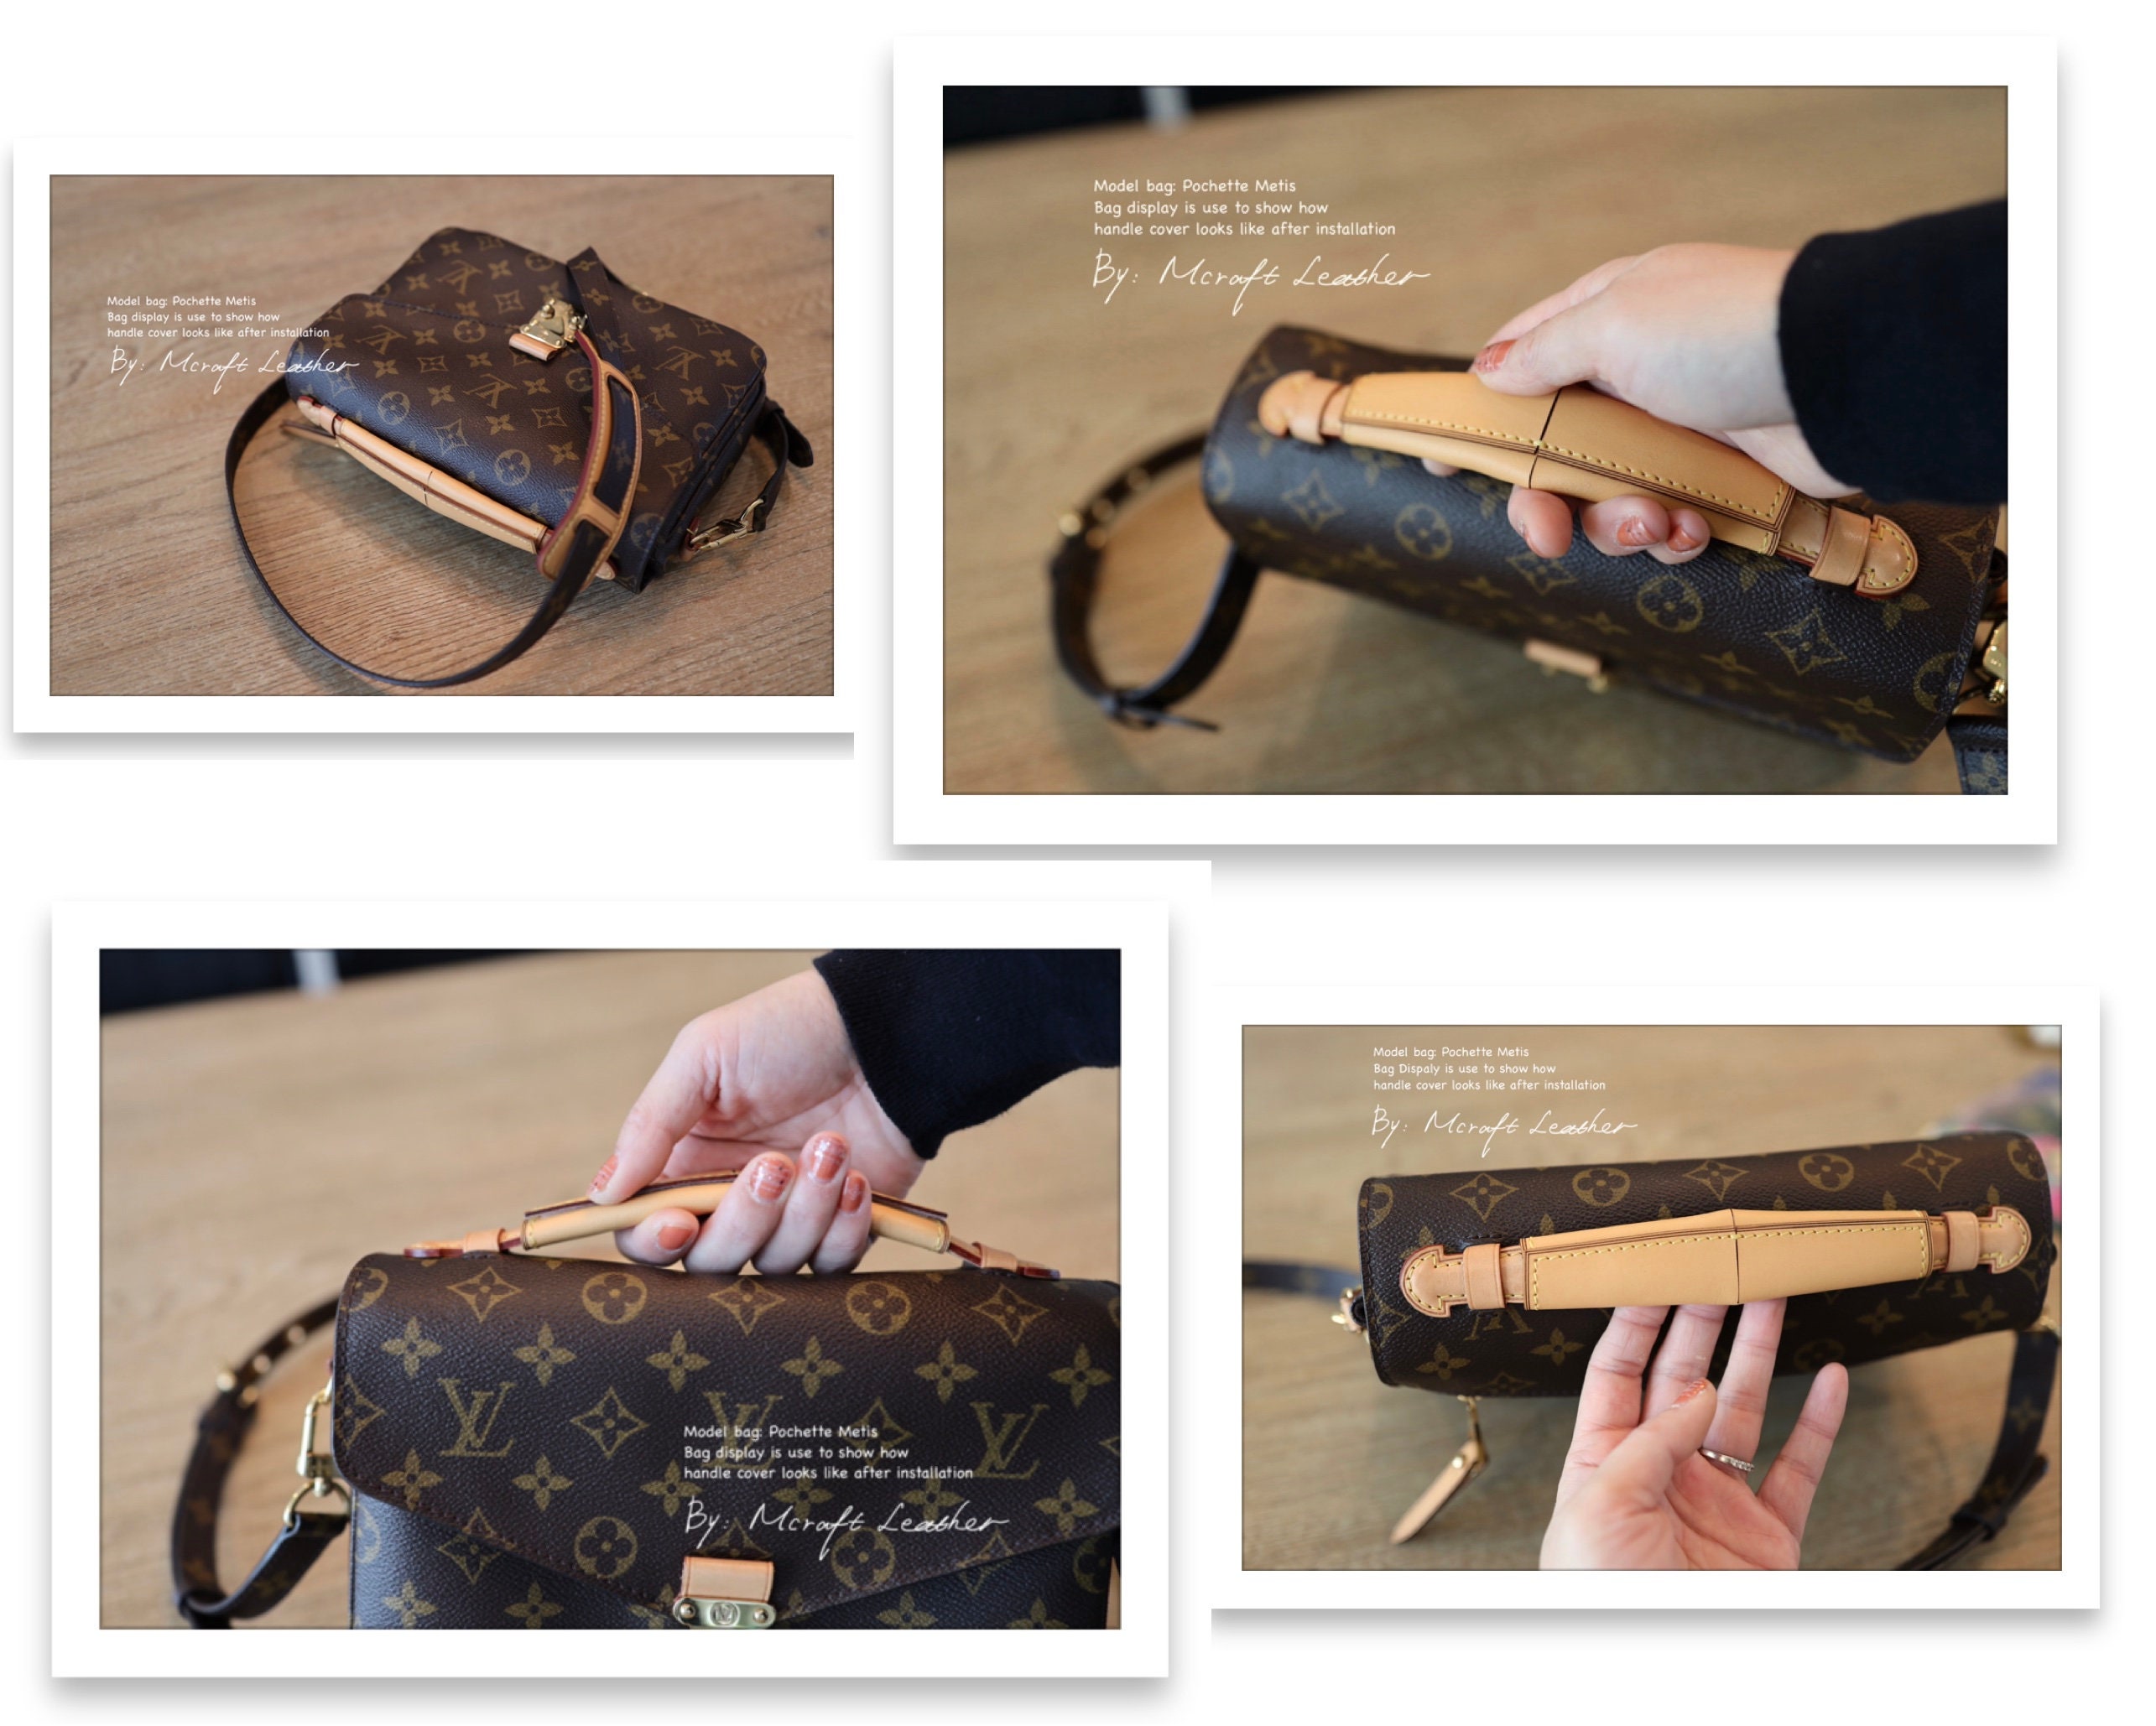 Louis Vuitton, Bags, Brown Mono Mini Speedyb Bag Charm Brand New Limited  Edition Collectors Item